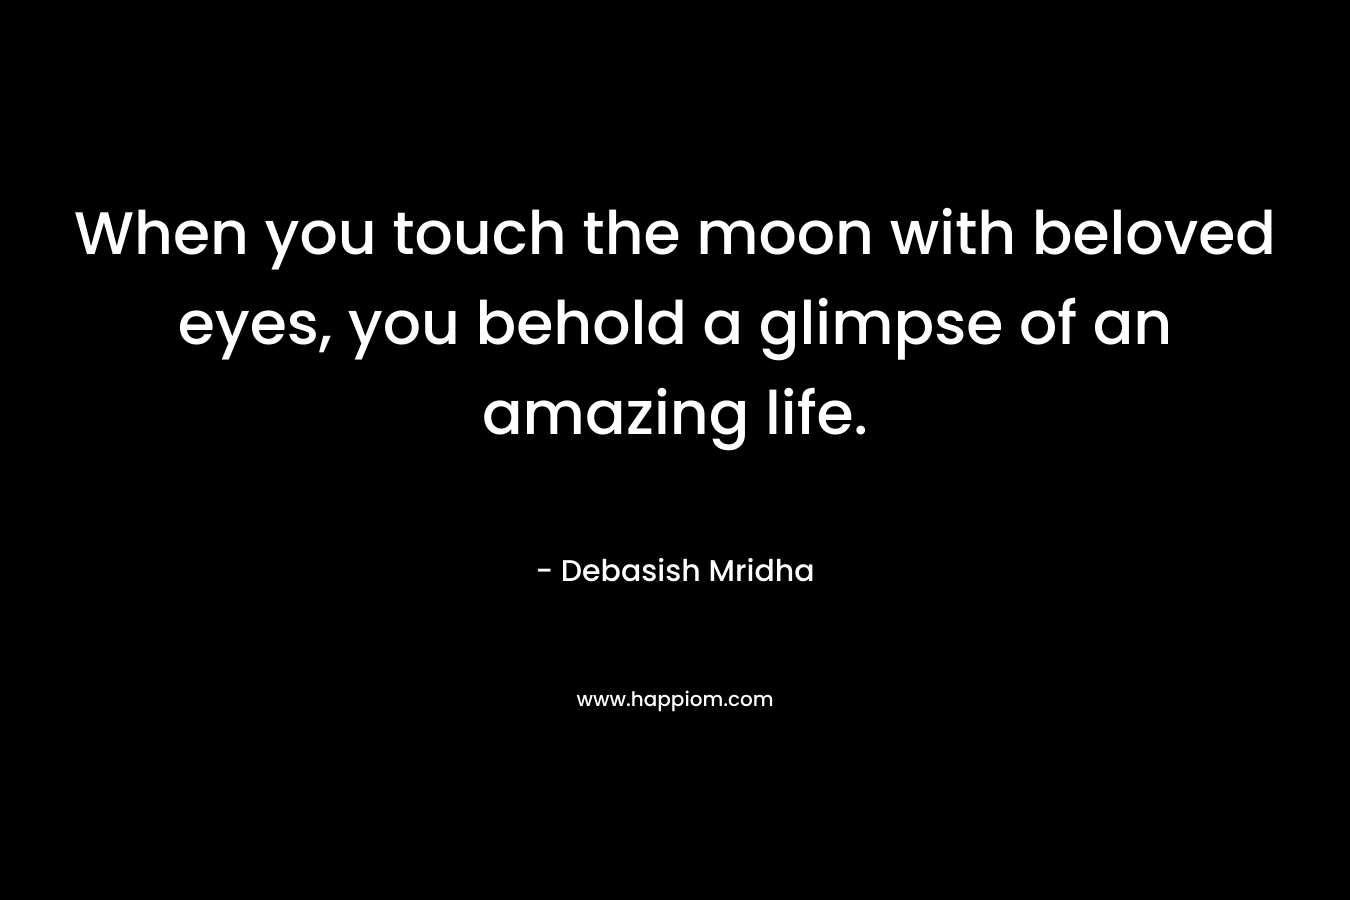 When you touch the moon with beloved eyes, you behold a glimpse of an amazing life.